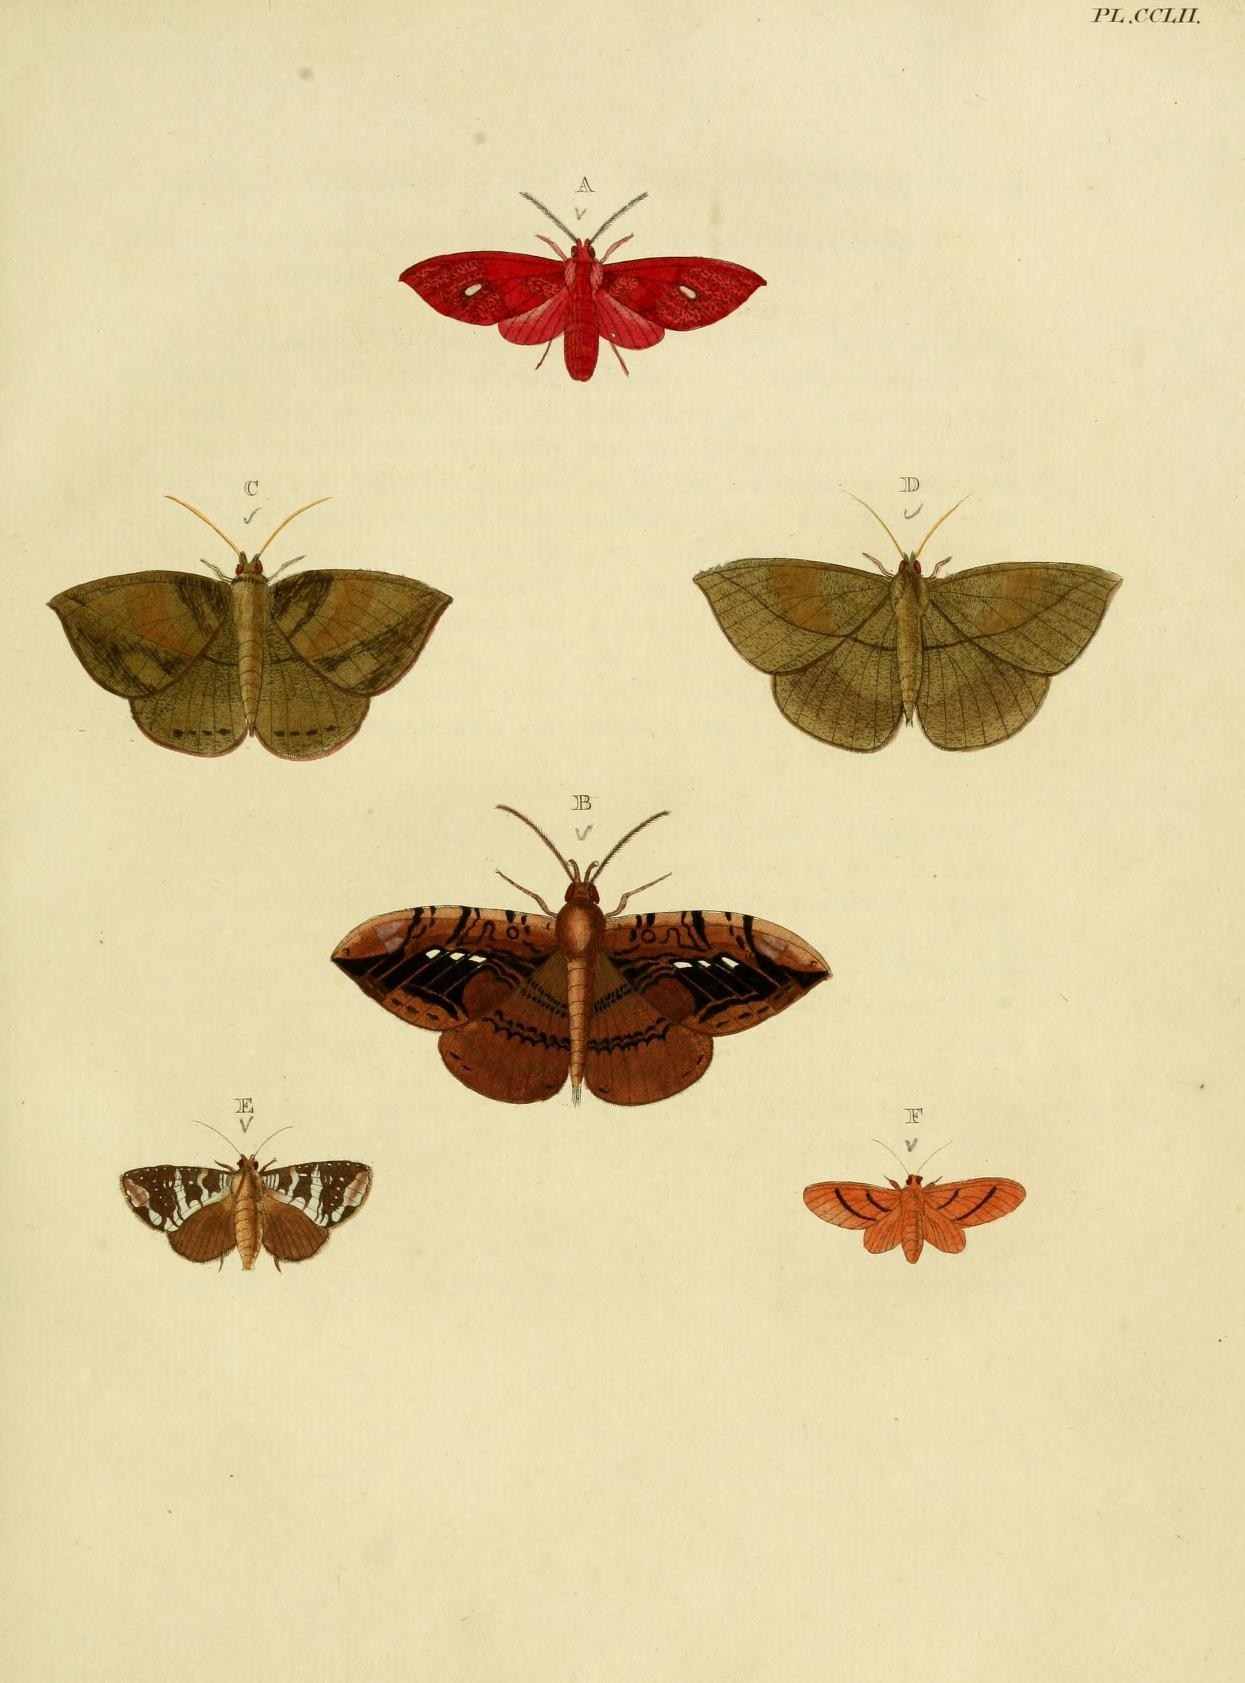 this is a group of erflies on an old paper